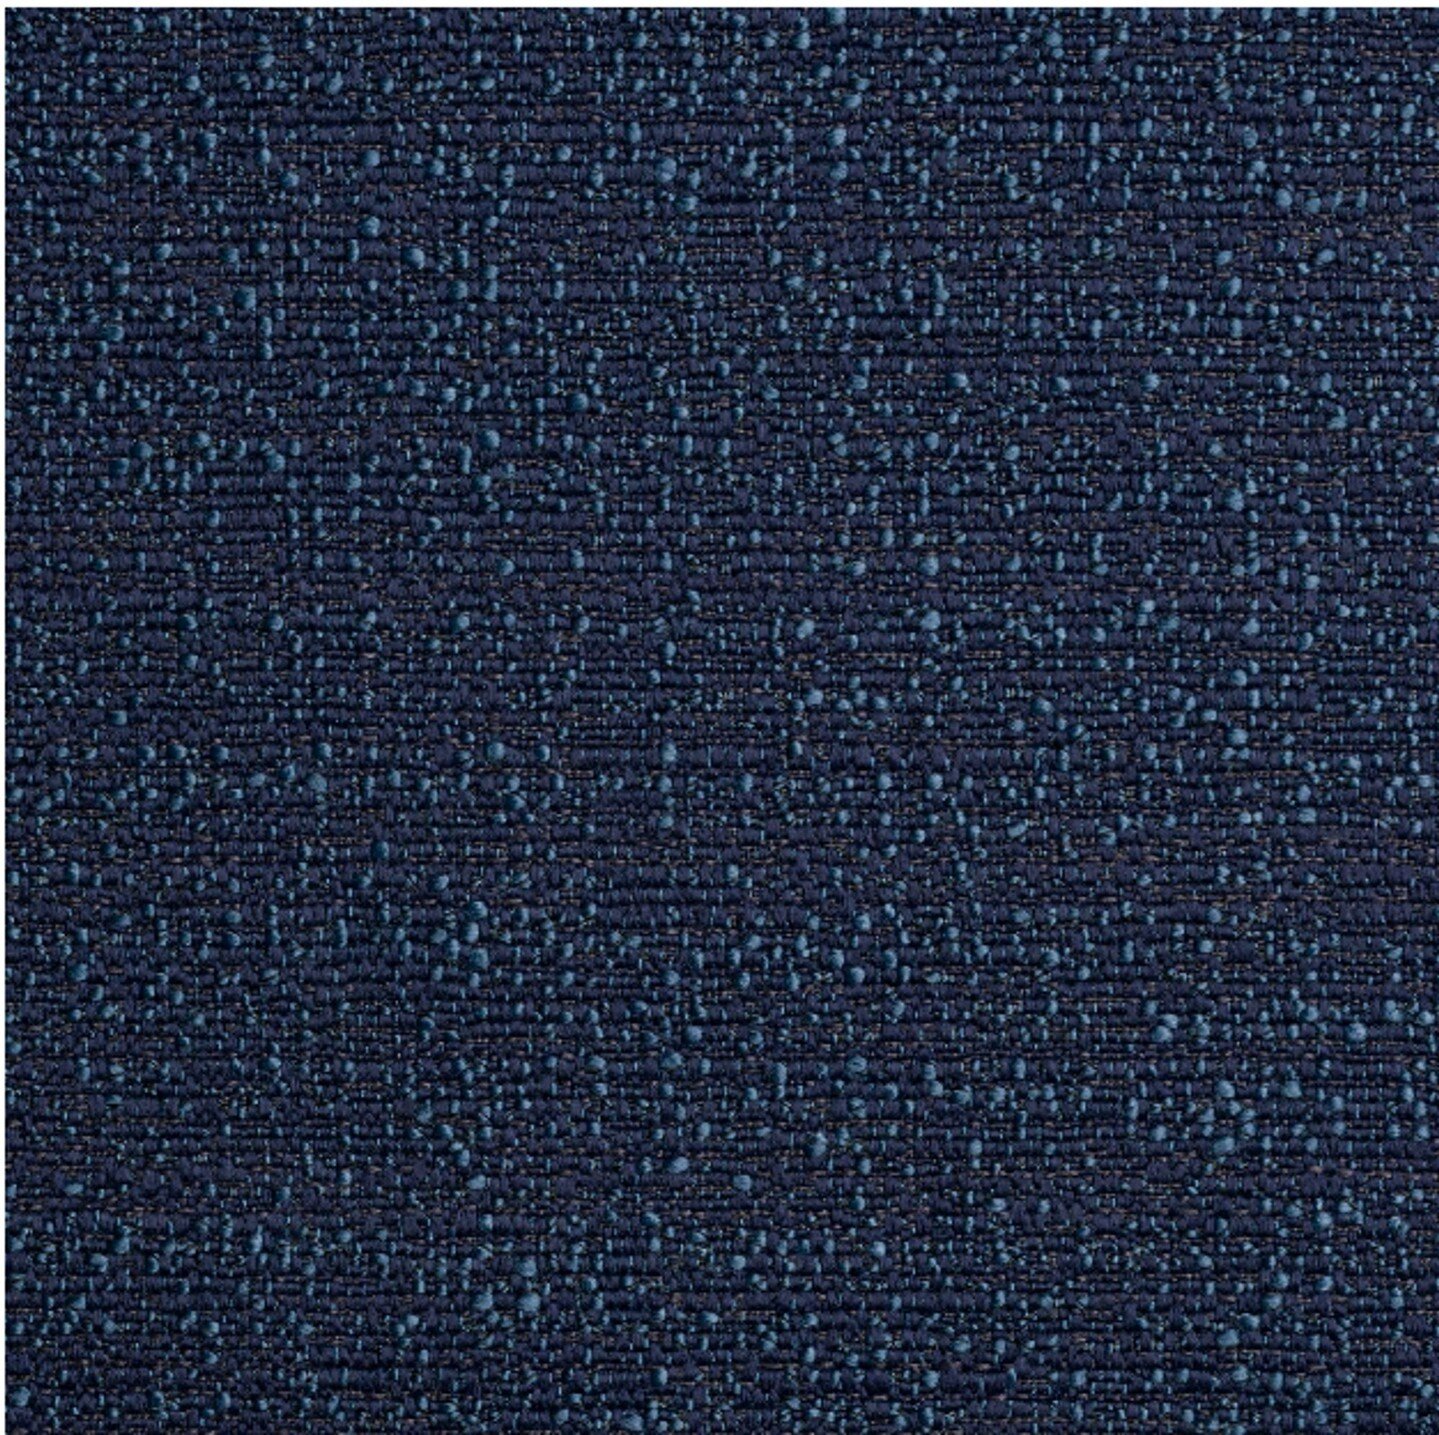 TEXTILE PICKS-

This heavily textured, navy fabric ELBA by Mokum will look great on contemporary pieces and mid century heirlooms alike. 

Woven in Italy using Solution Dyed boucle yarns and tumbled to create its soft hand, Elba is a dimensional upho